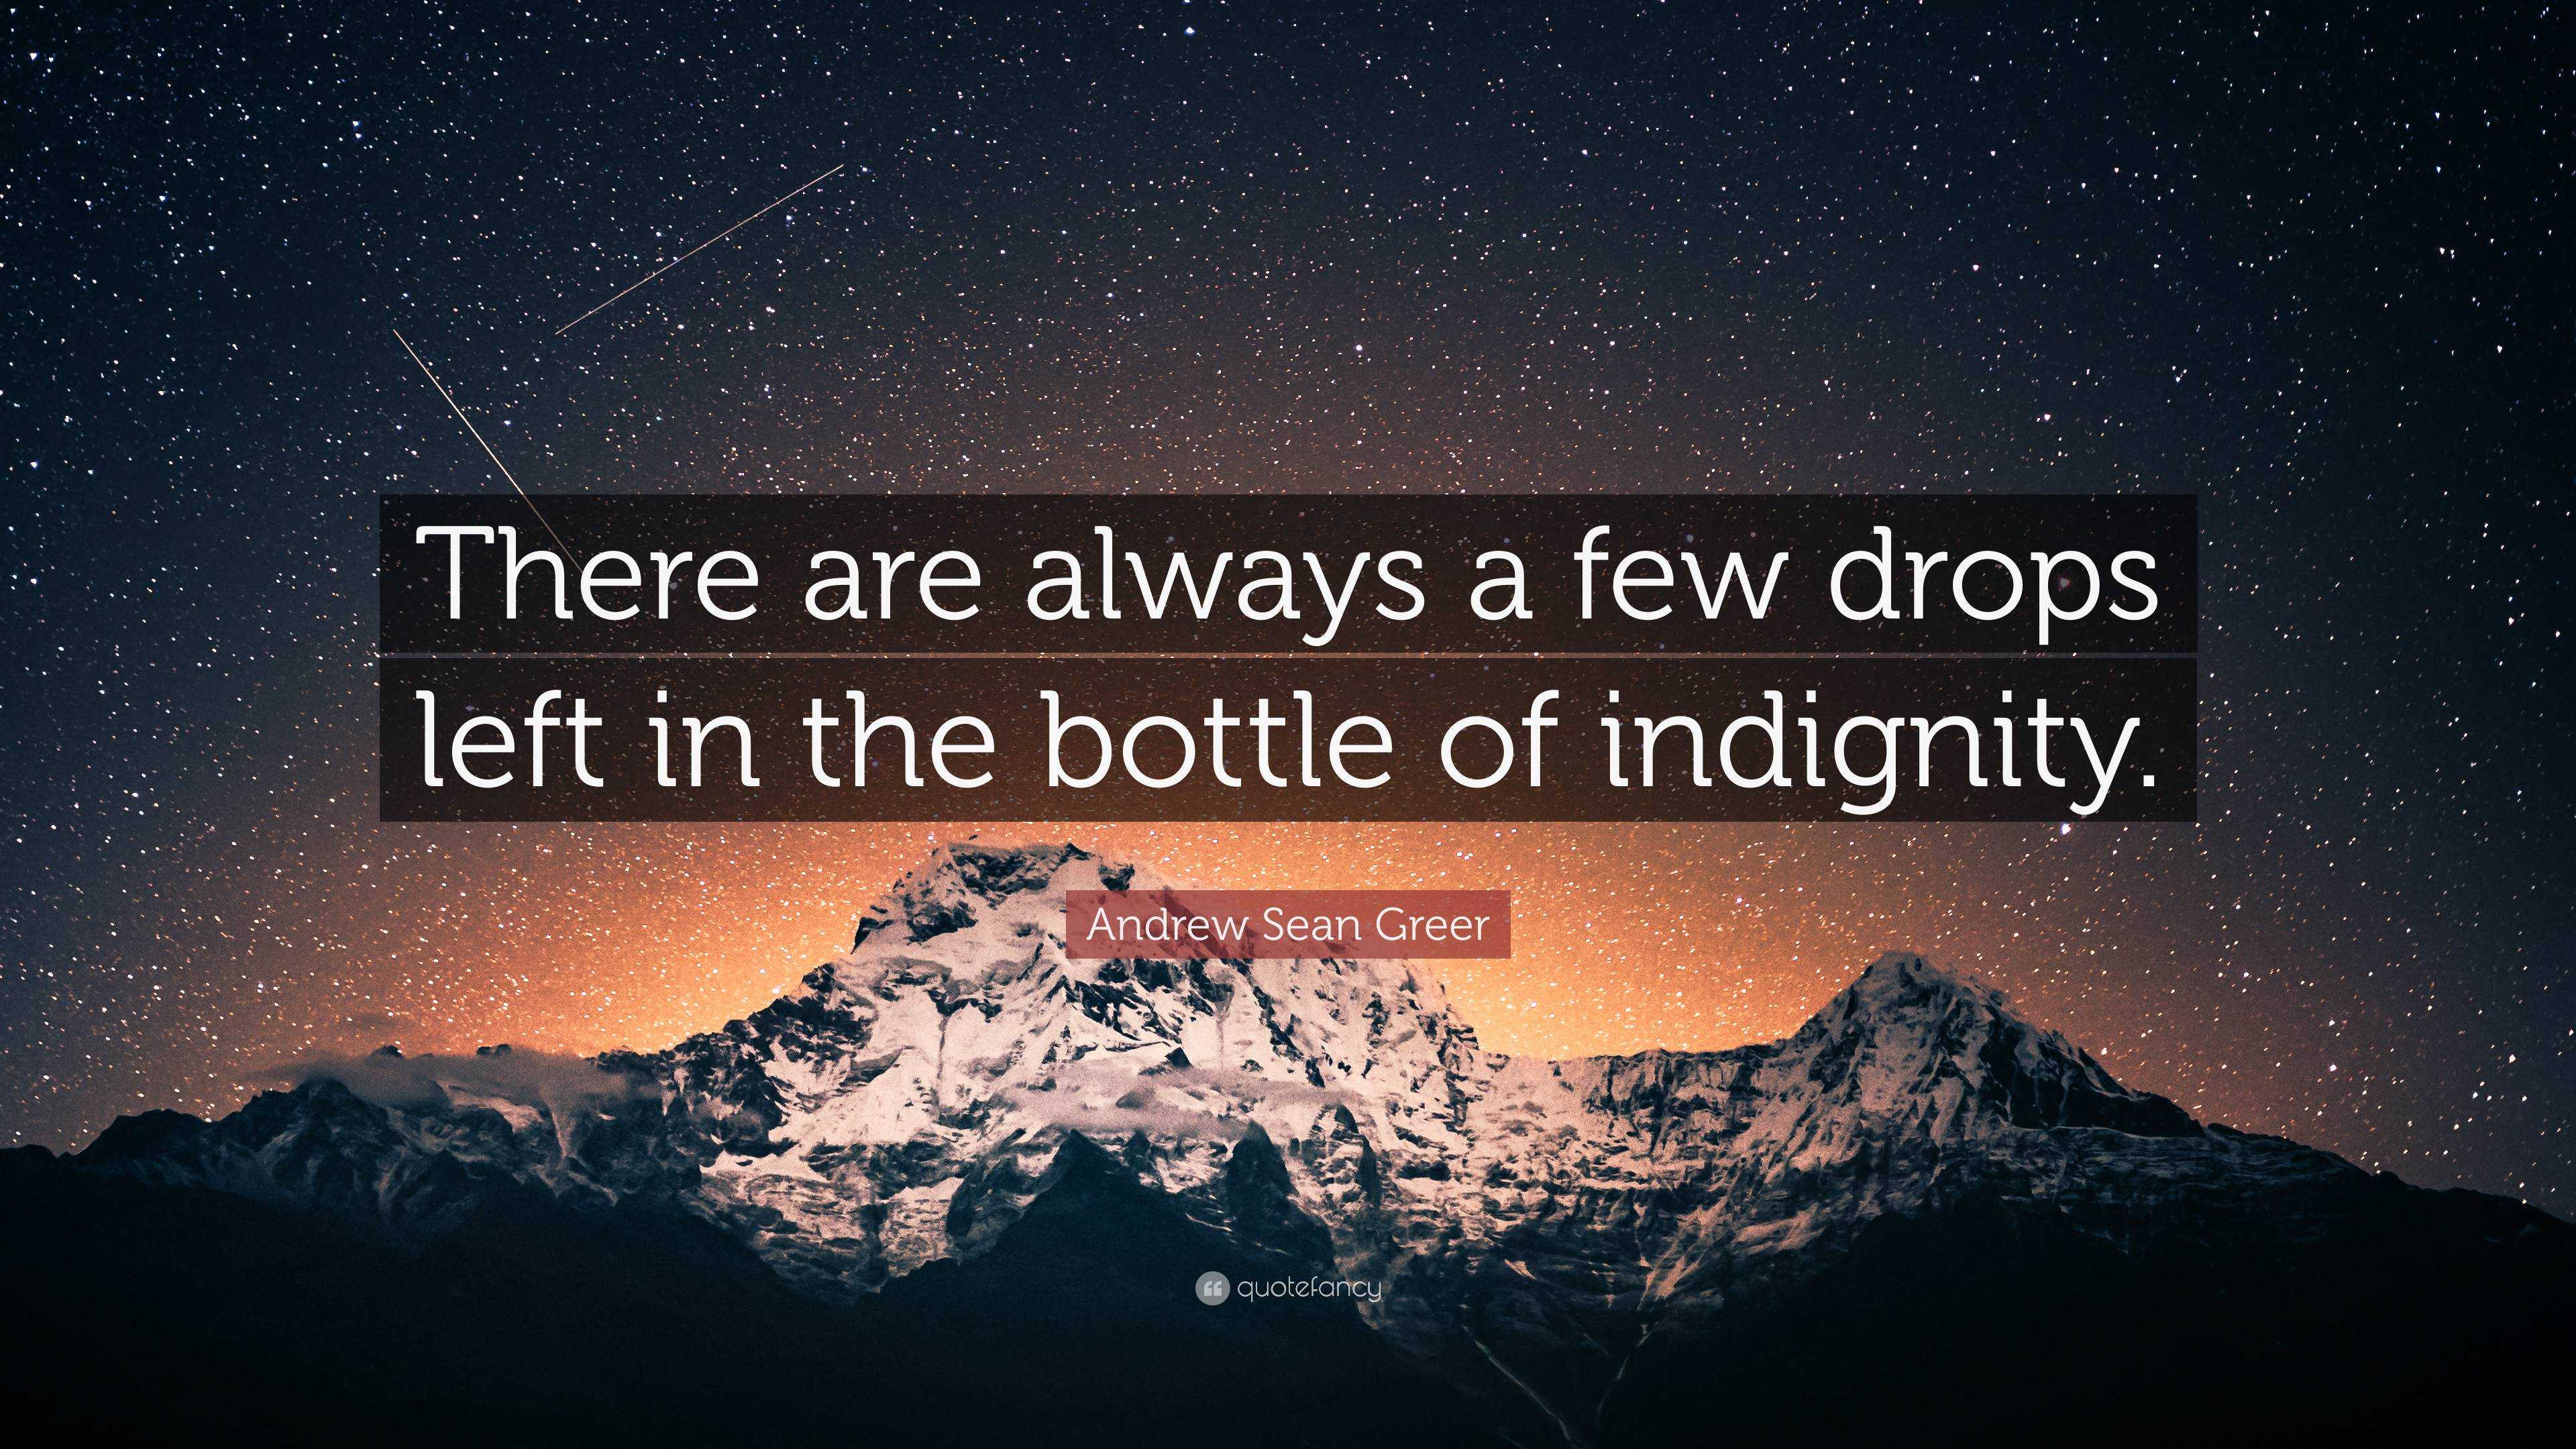 https://quotefancy.com/media/wallpaper/3840x2160/6697588-Andrew-Sean-Greer-Quote-There-are-always-a-few-drops-left-in-the.jpg